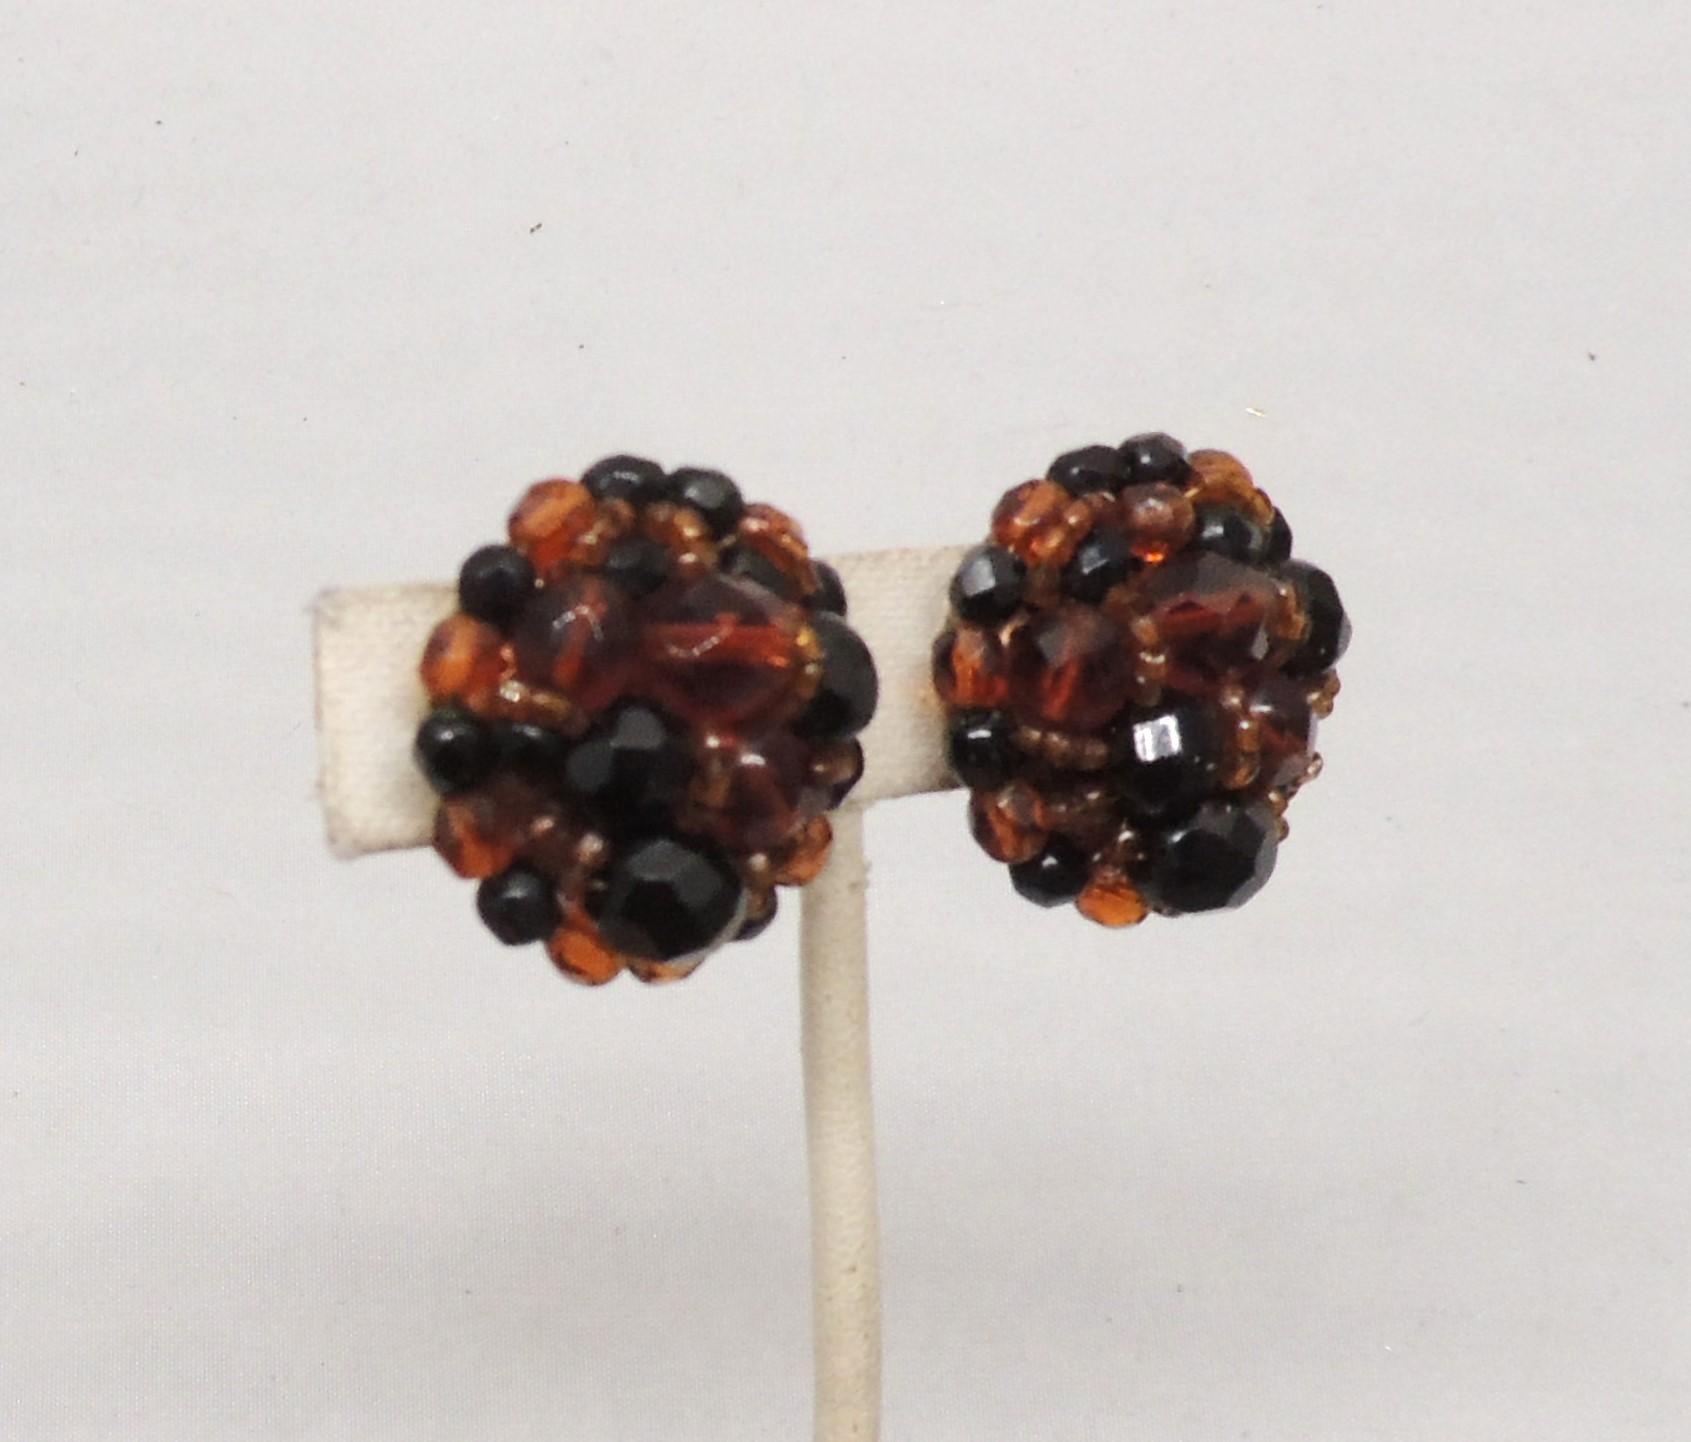 Vintage 1950s Signed Coppola e Toppo Italy Brown & Black Beaded Clip Earrings In Good Condition For Sale In Easton, PA